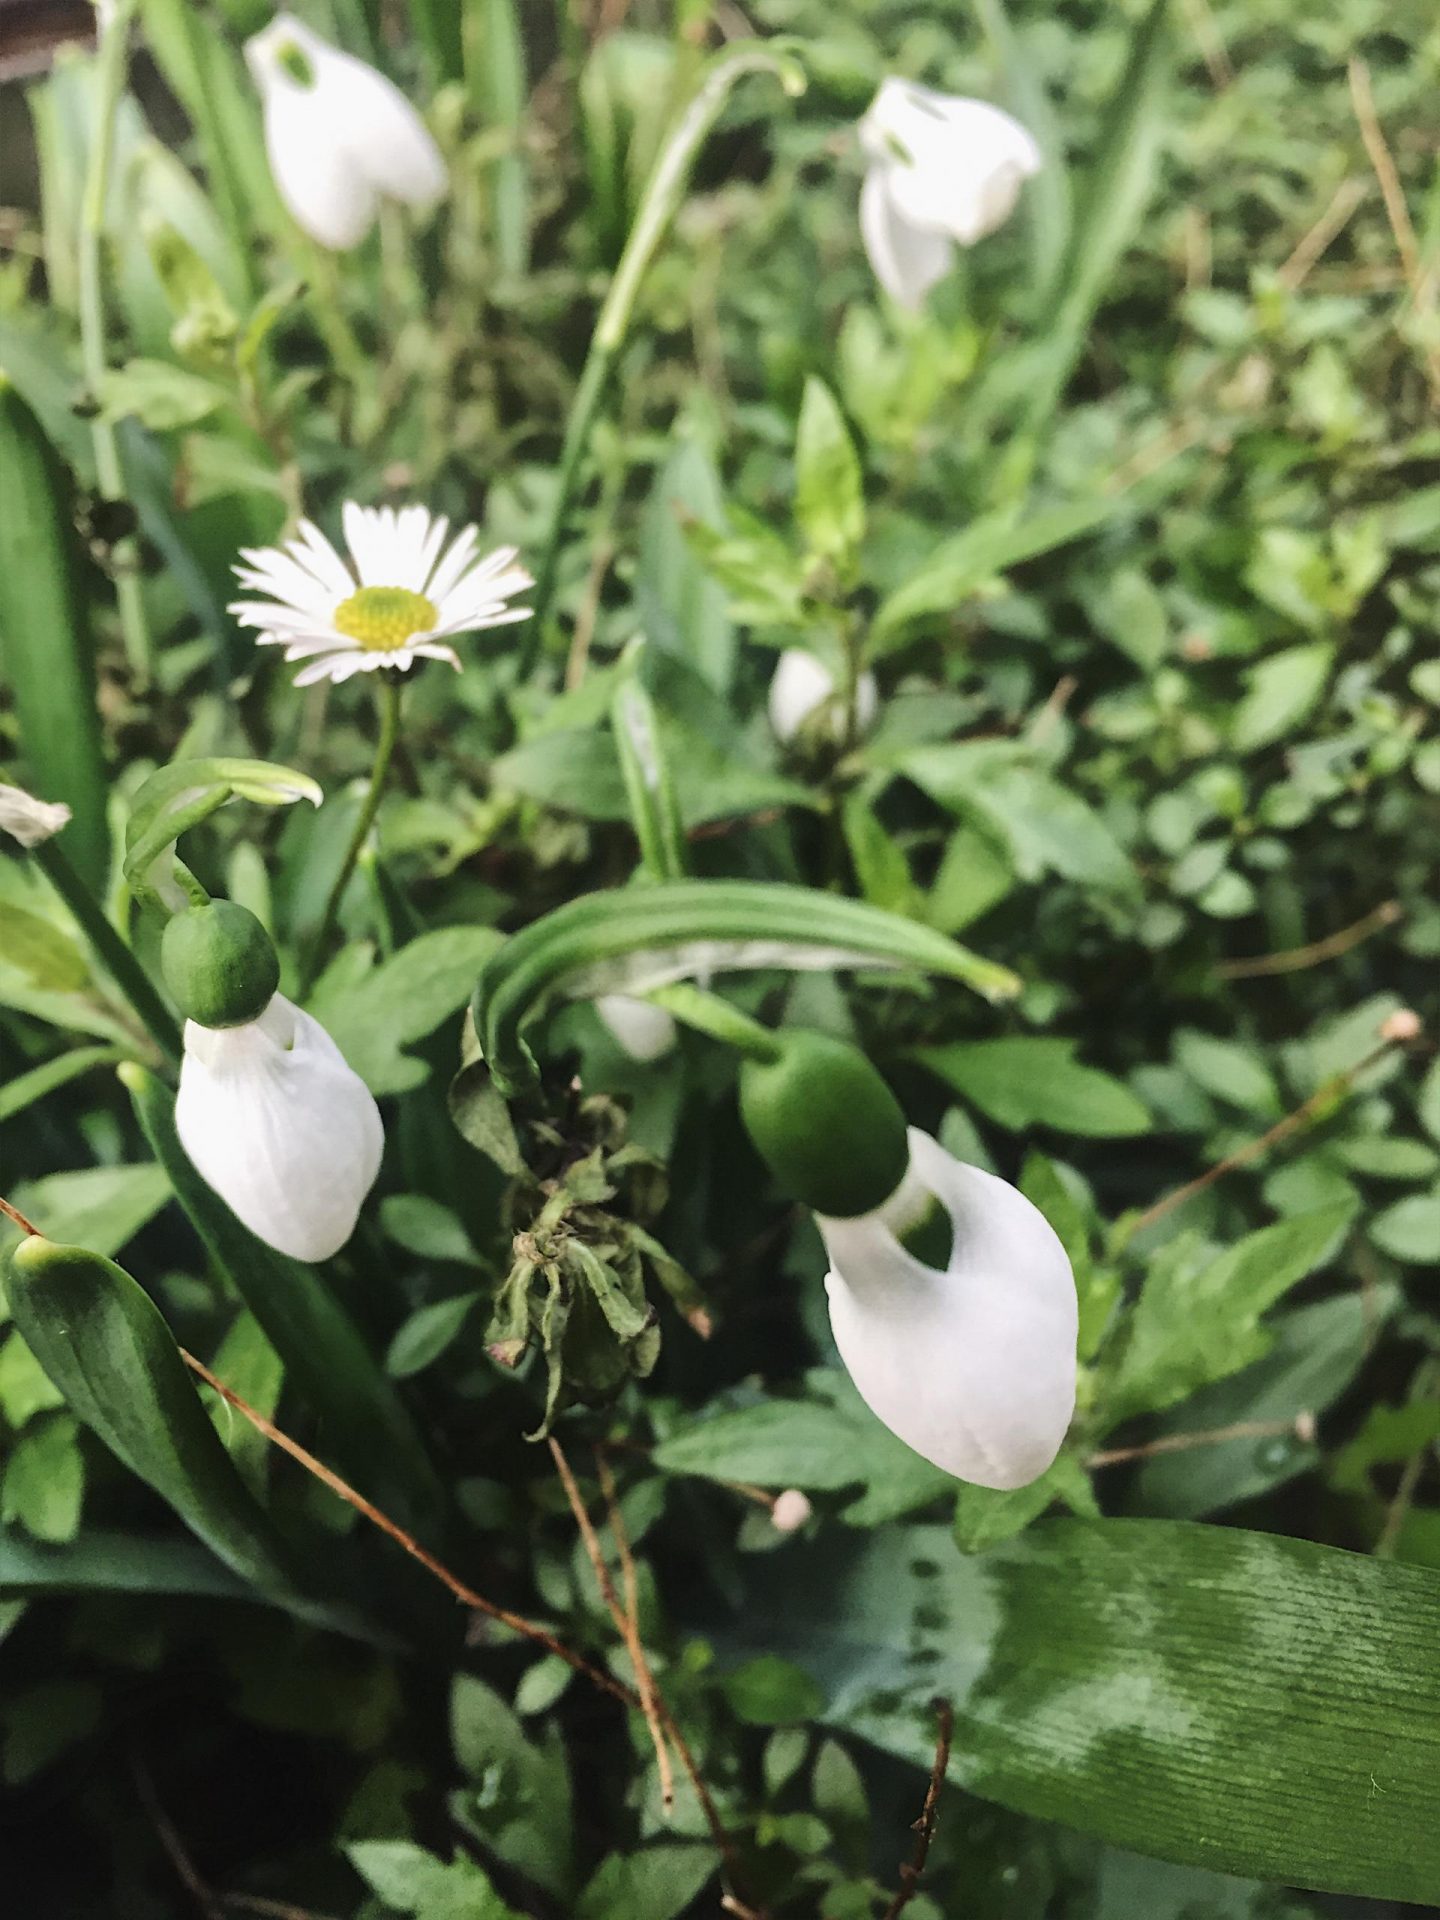 snowdrops and daisies